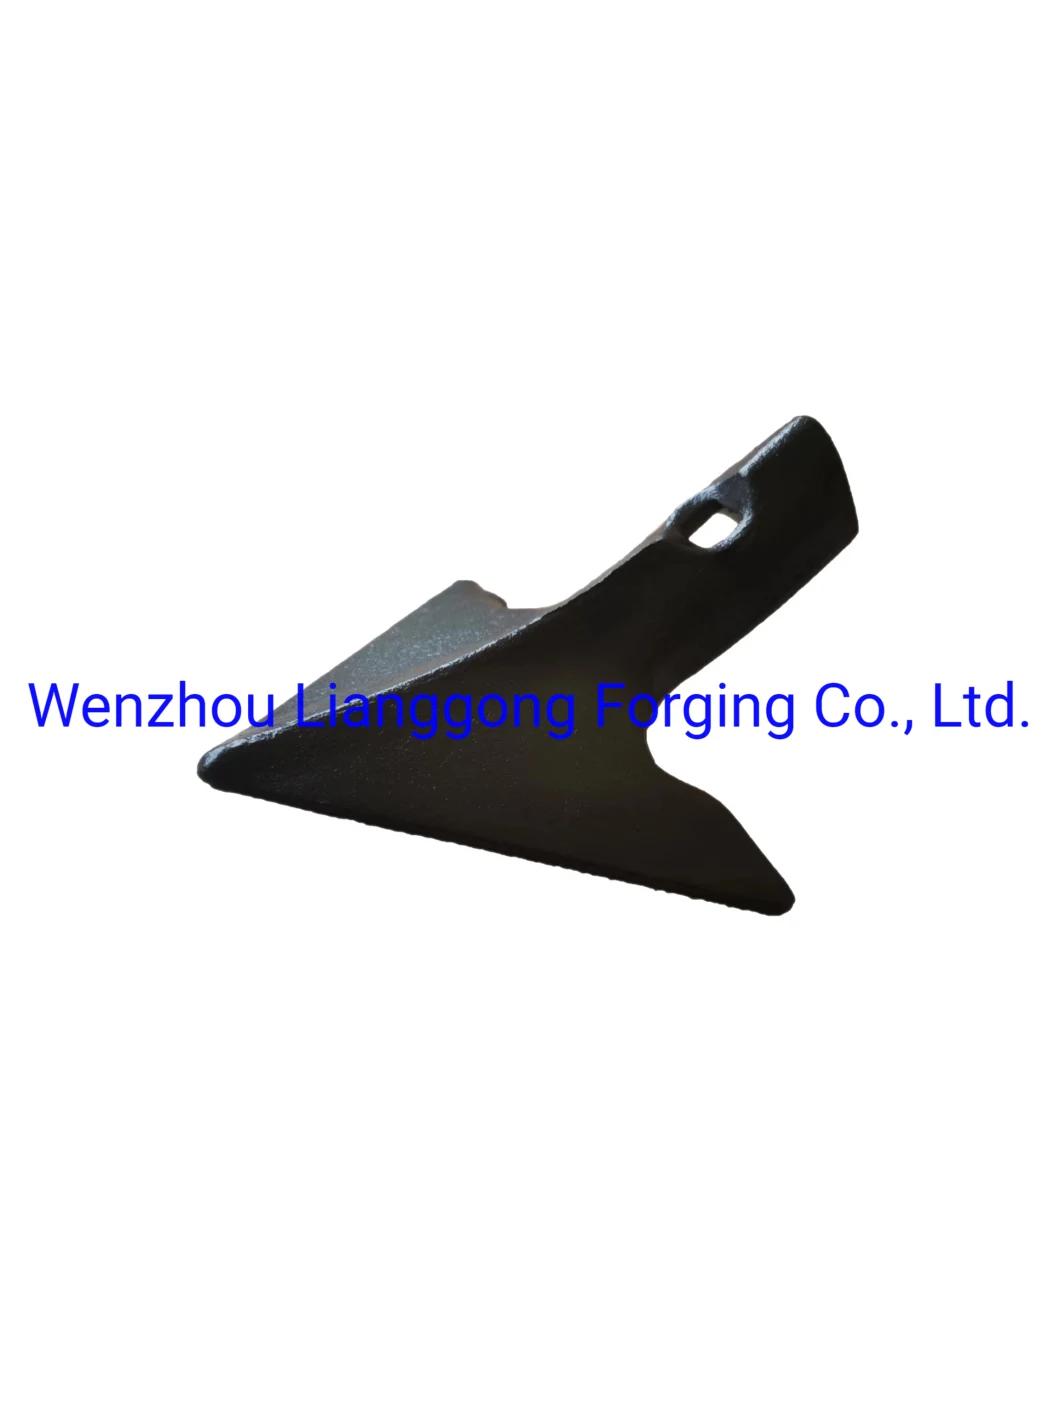 Customized Forging Tiller/Cultivator Sweep/Points/Tines in Agricultural Machinery